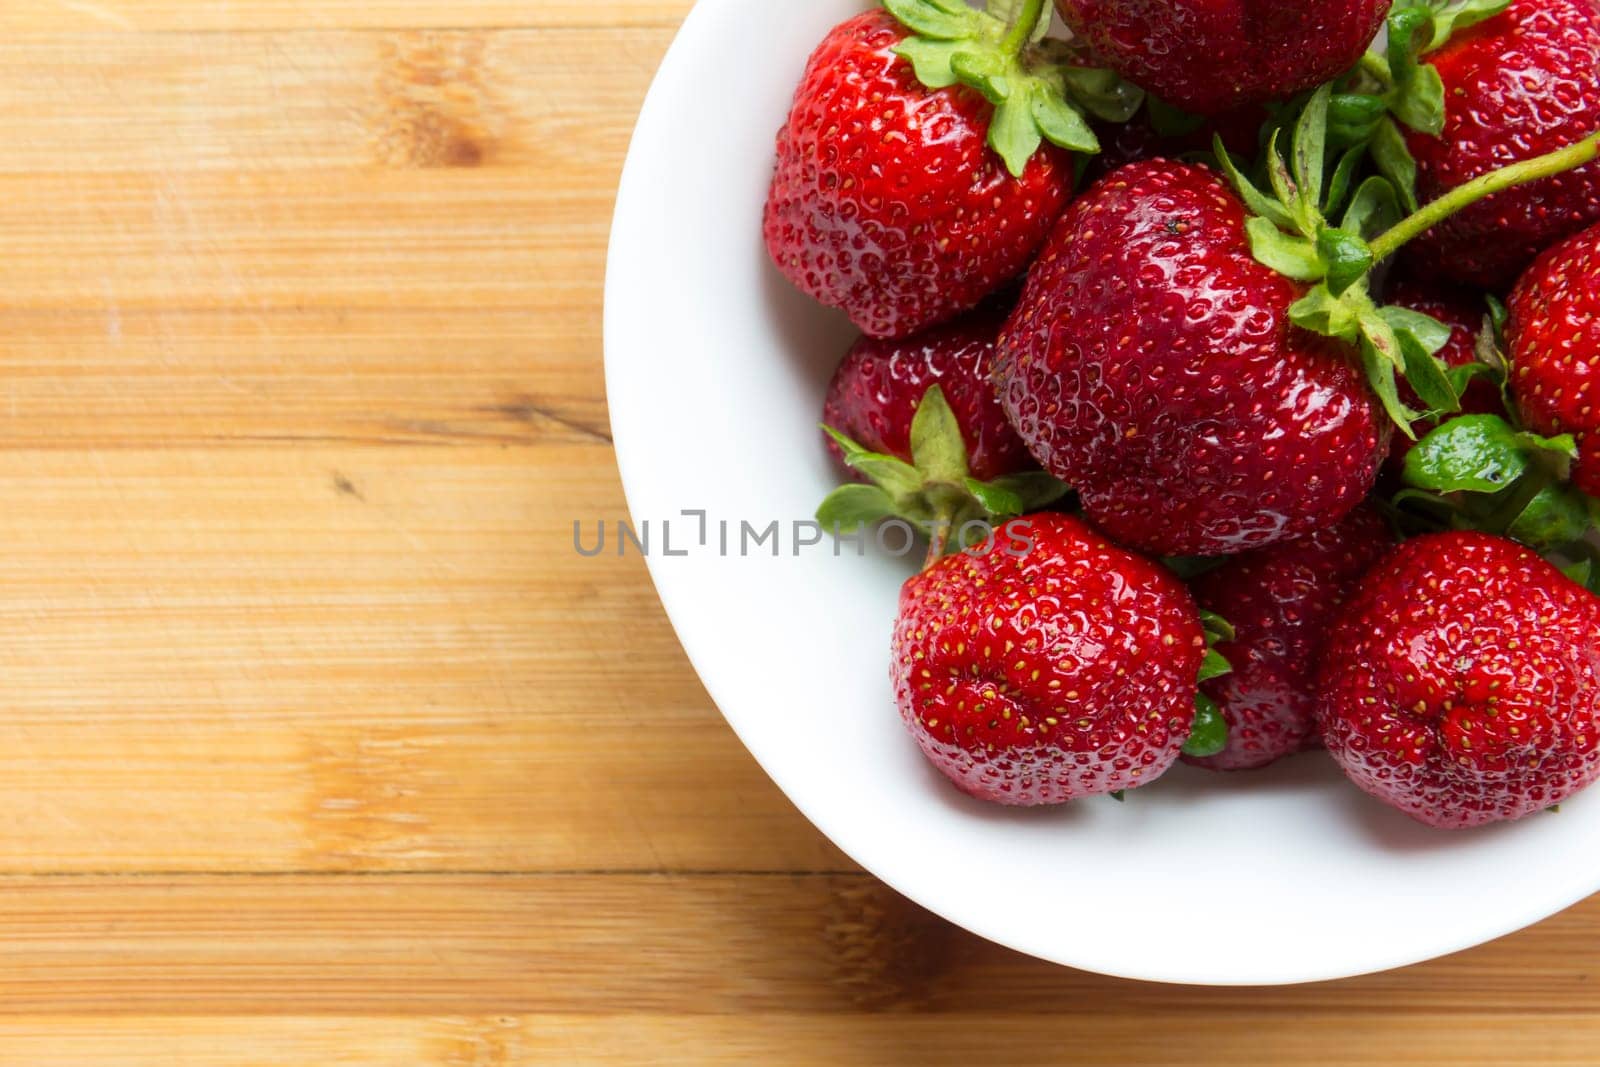 Large, red strawberries lie in a white plate on a wooden surface. by Alla_Yurtayeva